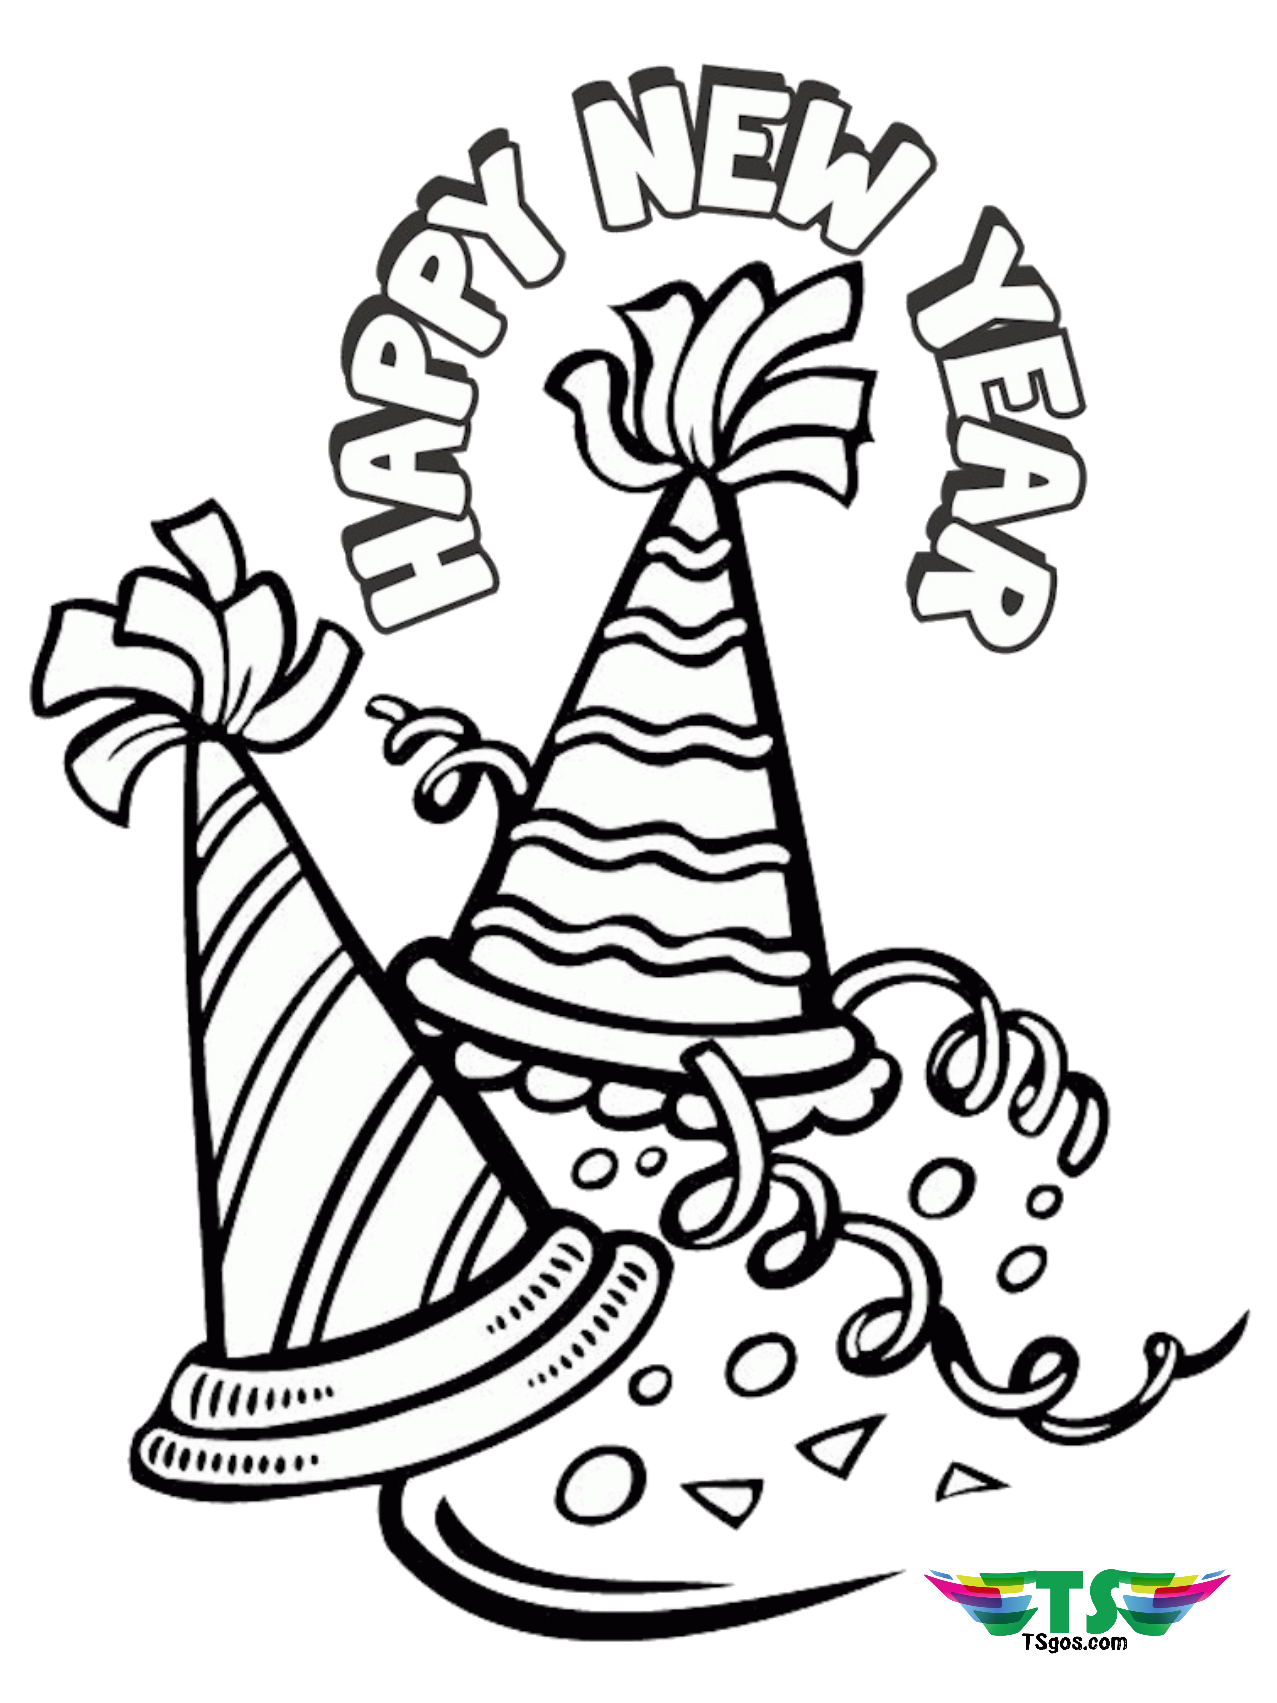 Free download happy new year coloring picture.